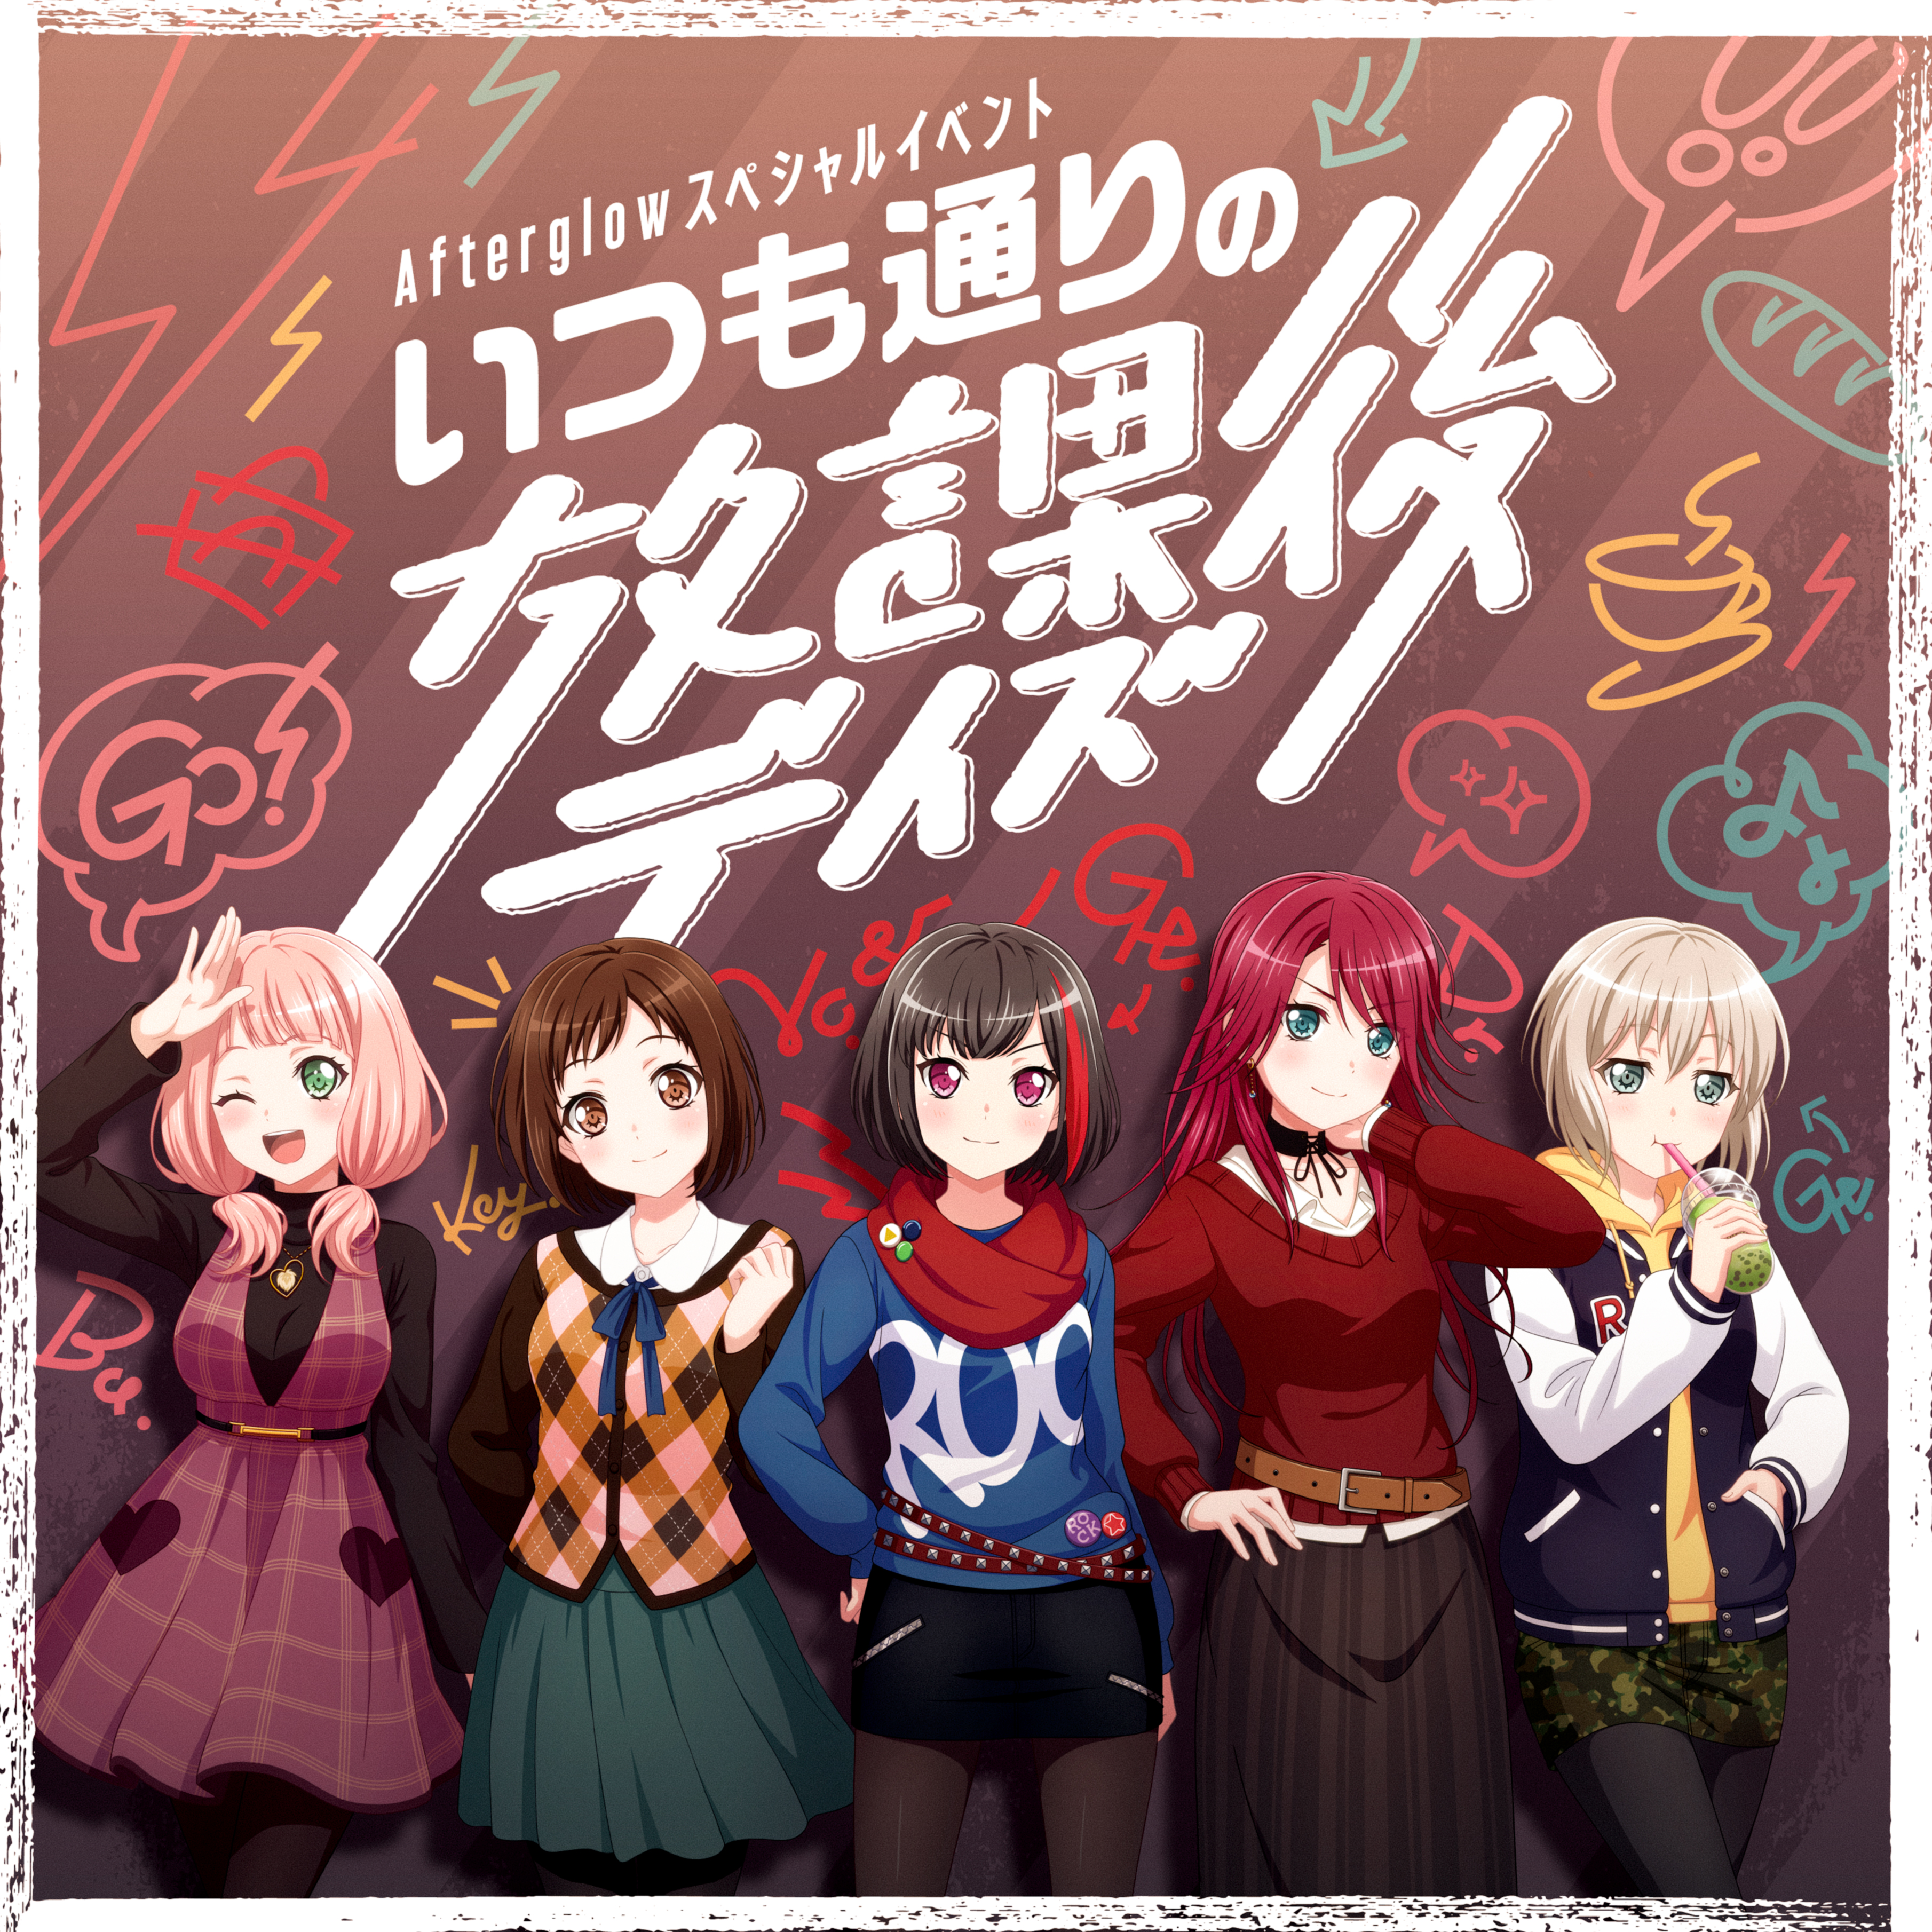 Afterglow — Off we go. (BanG Dream!) — Anime Liryca